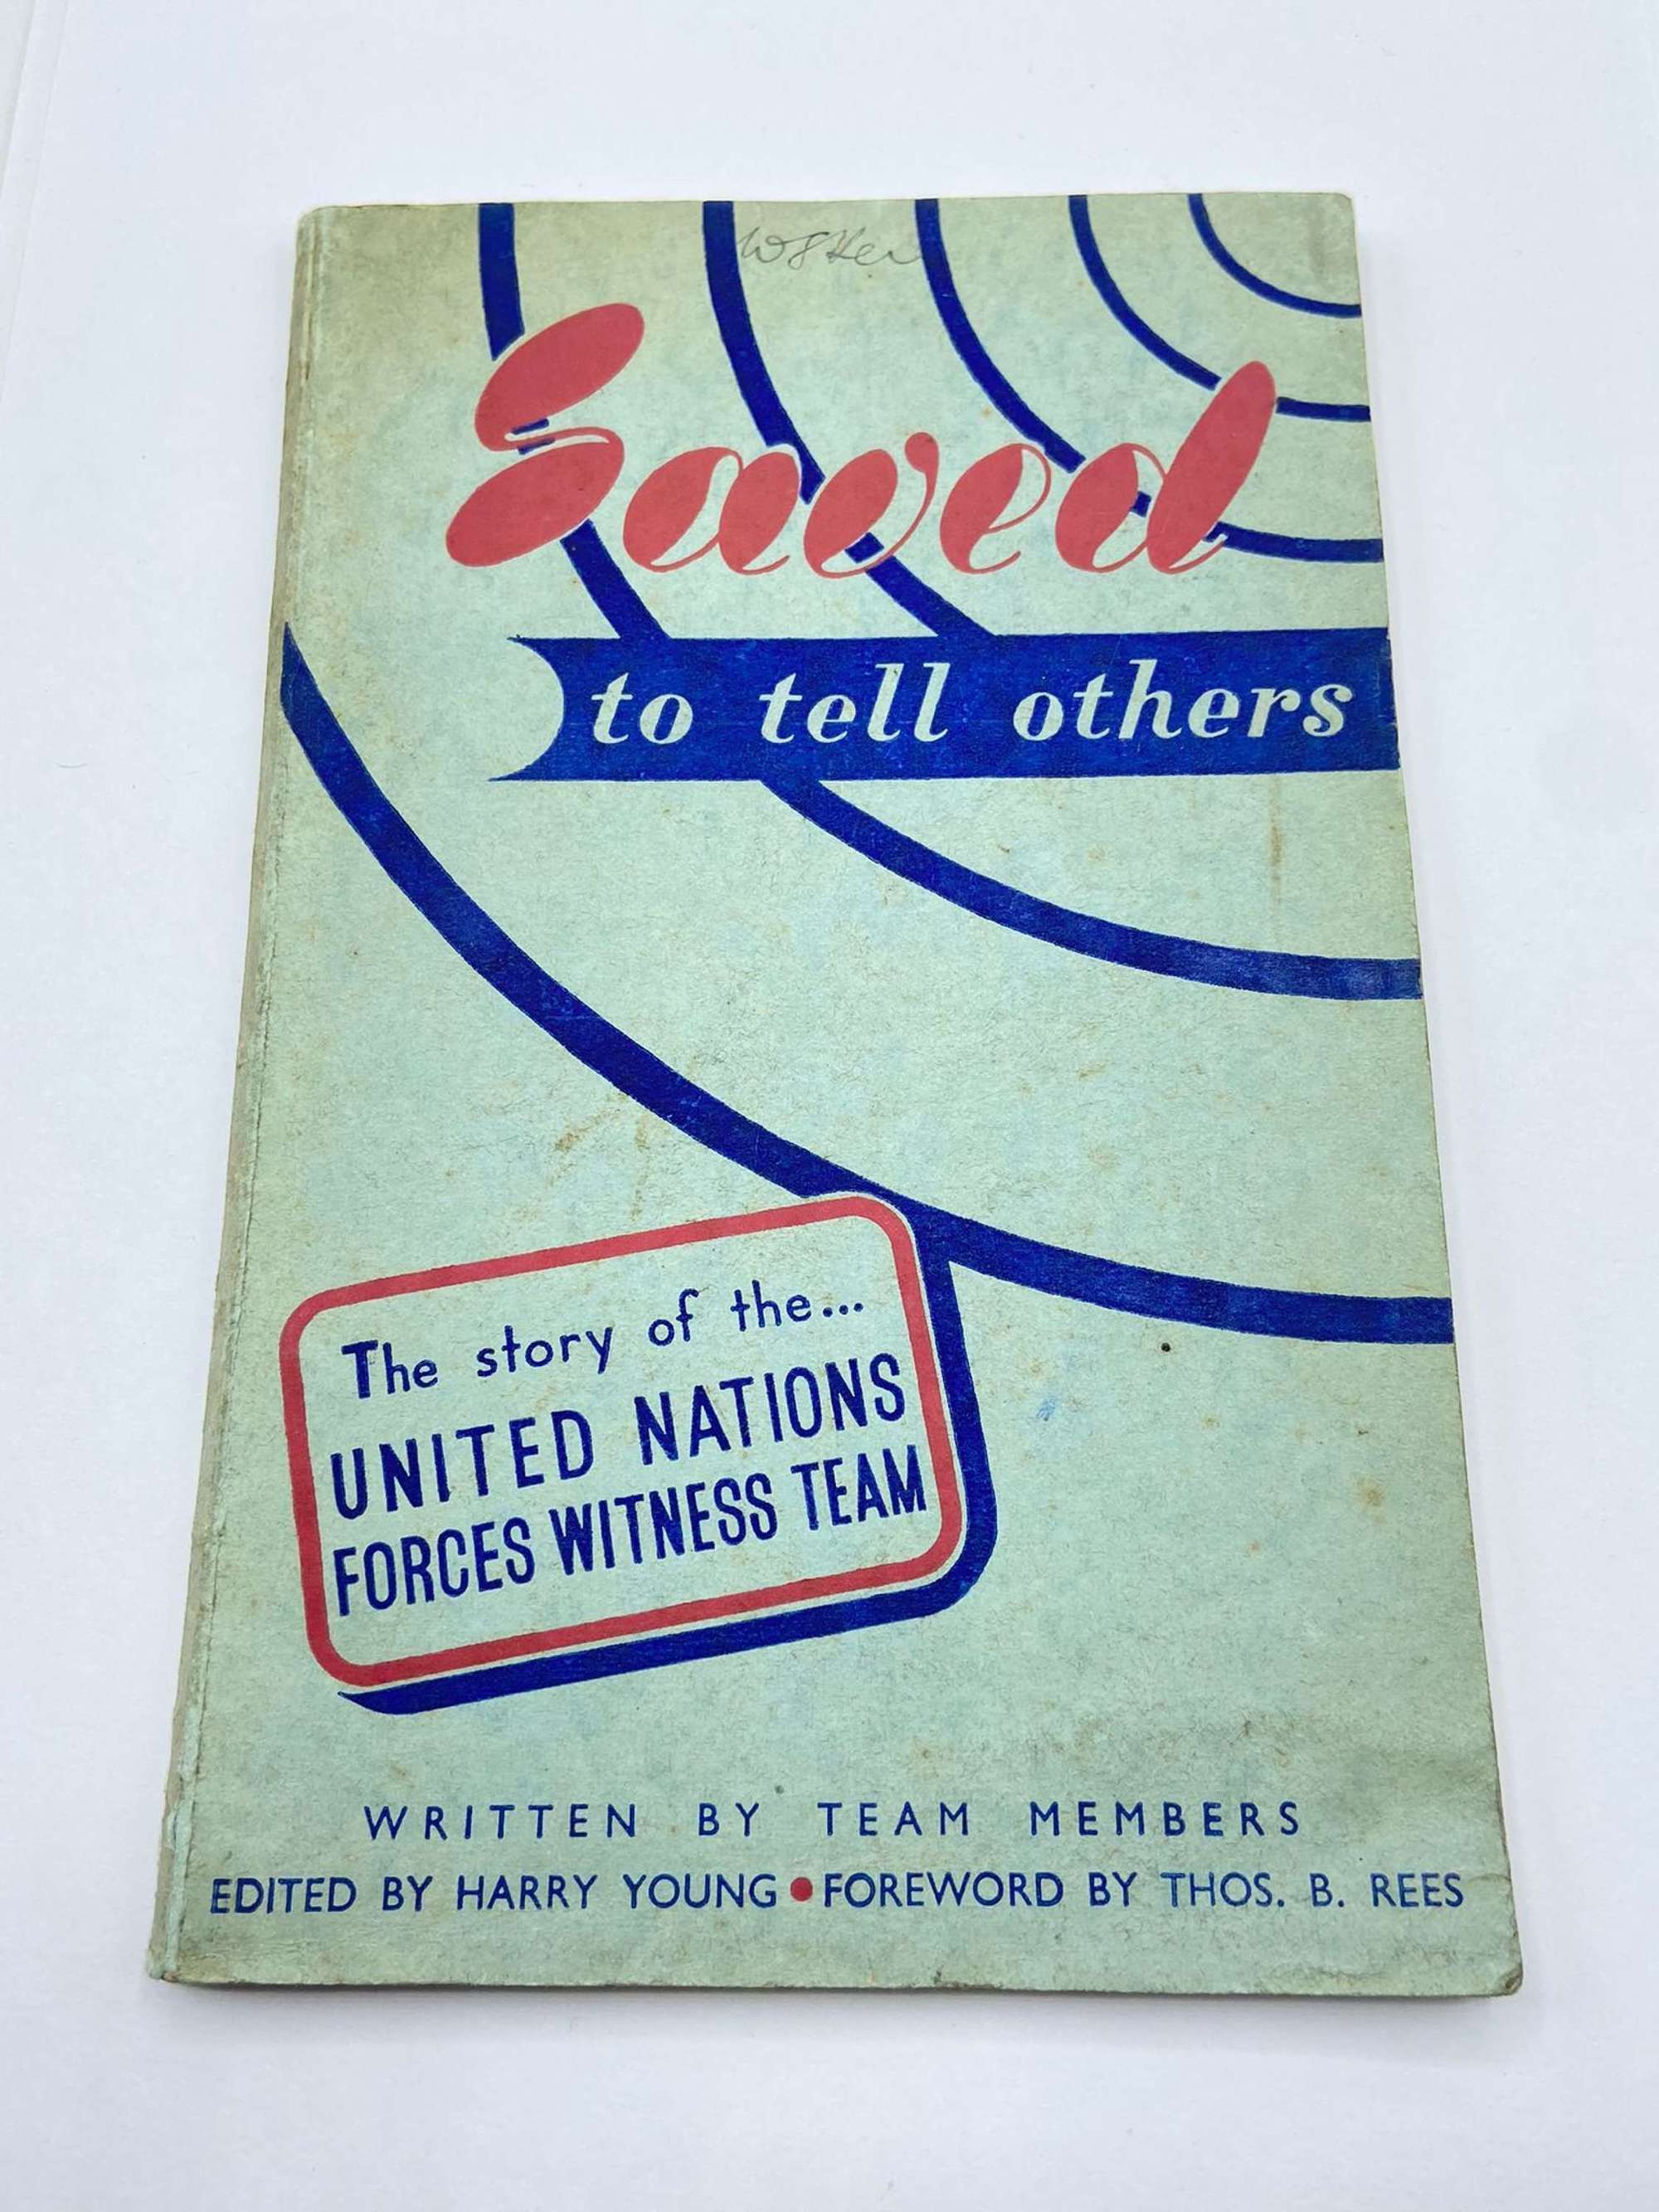 WW2 Story Of The United Nations Whiteness Team Saved To Tell Others